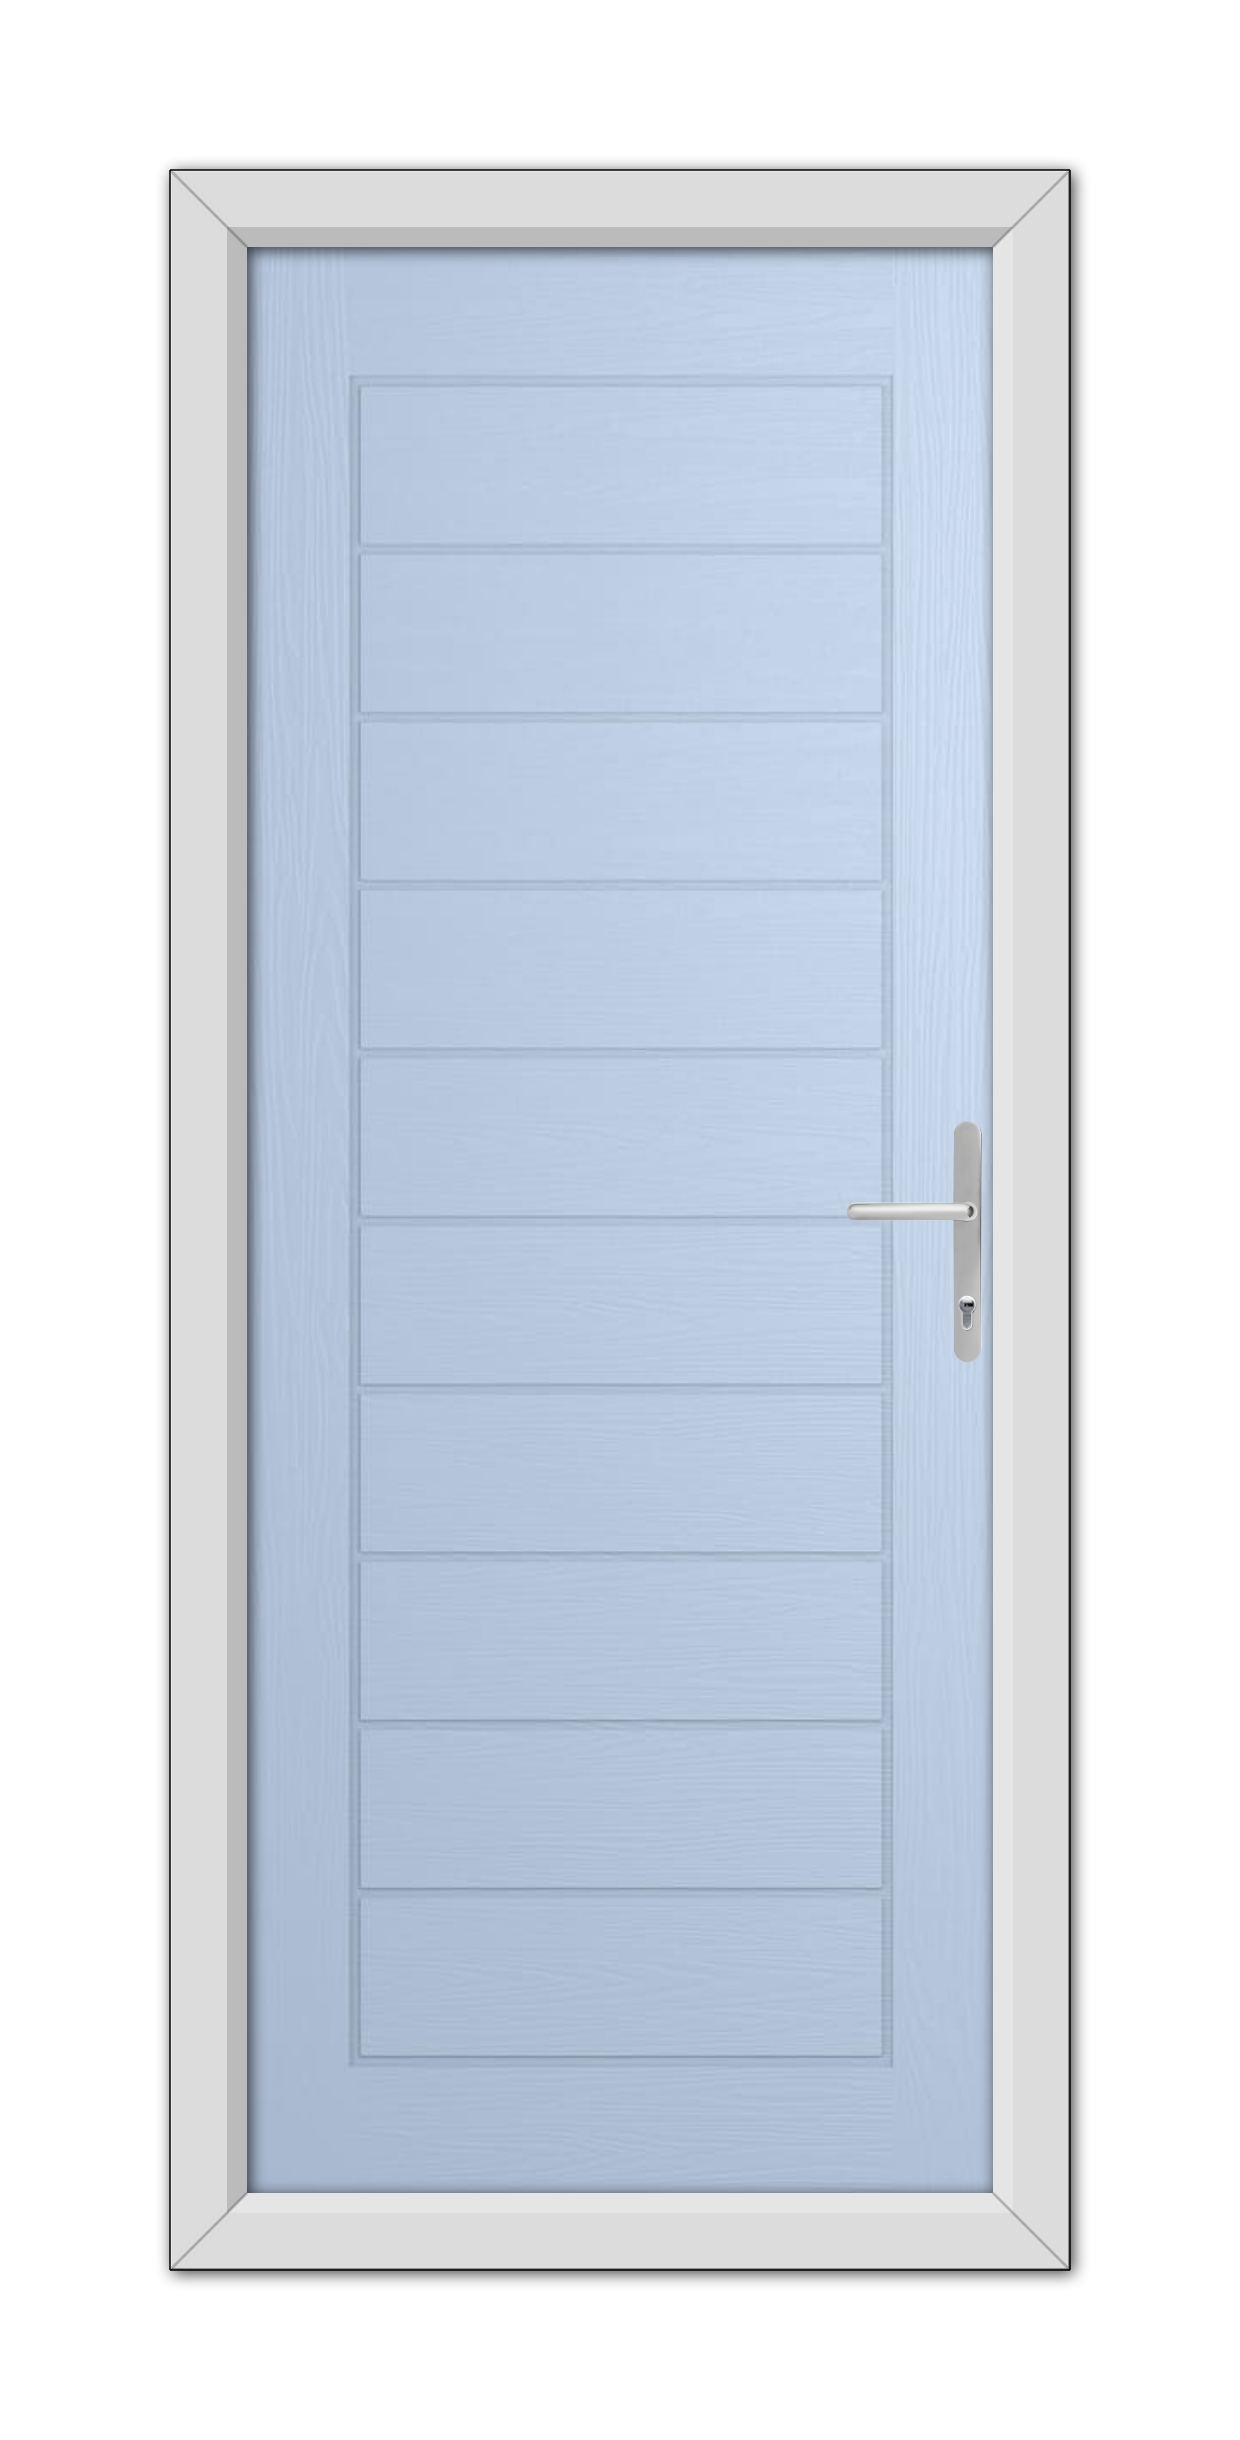 A Duck Egg Blue Cambridge Composite Door with horizontal panels, a stainless steel handle, and a white frame, viewed from the front.